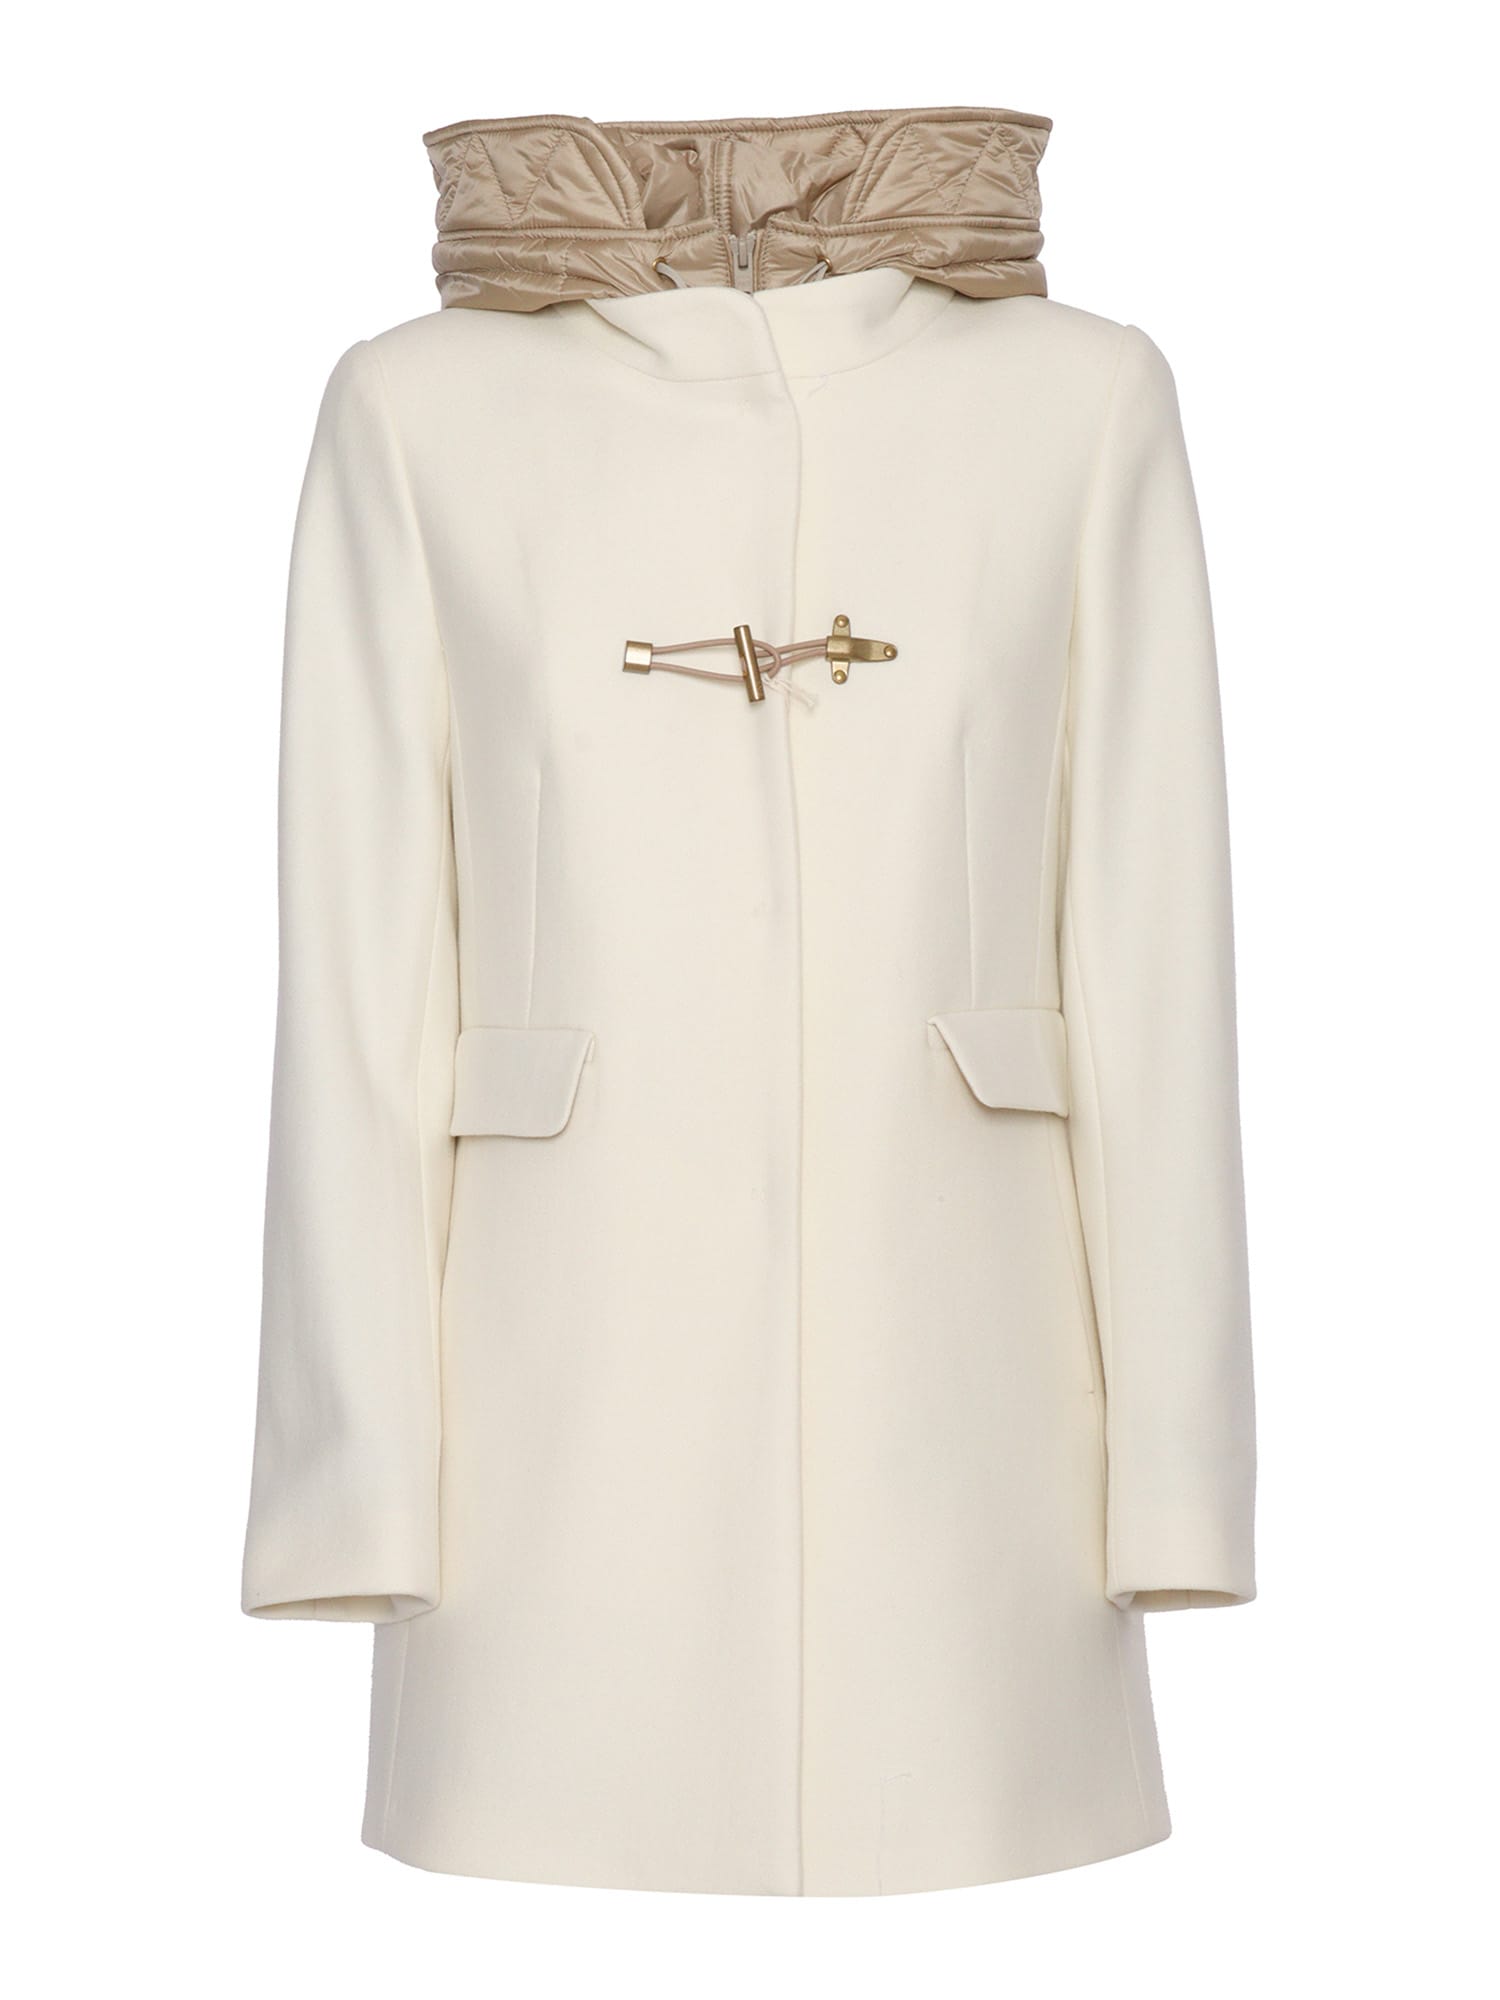 FAY DOUBLE FRONT TOGGLE COAT